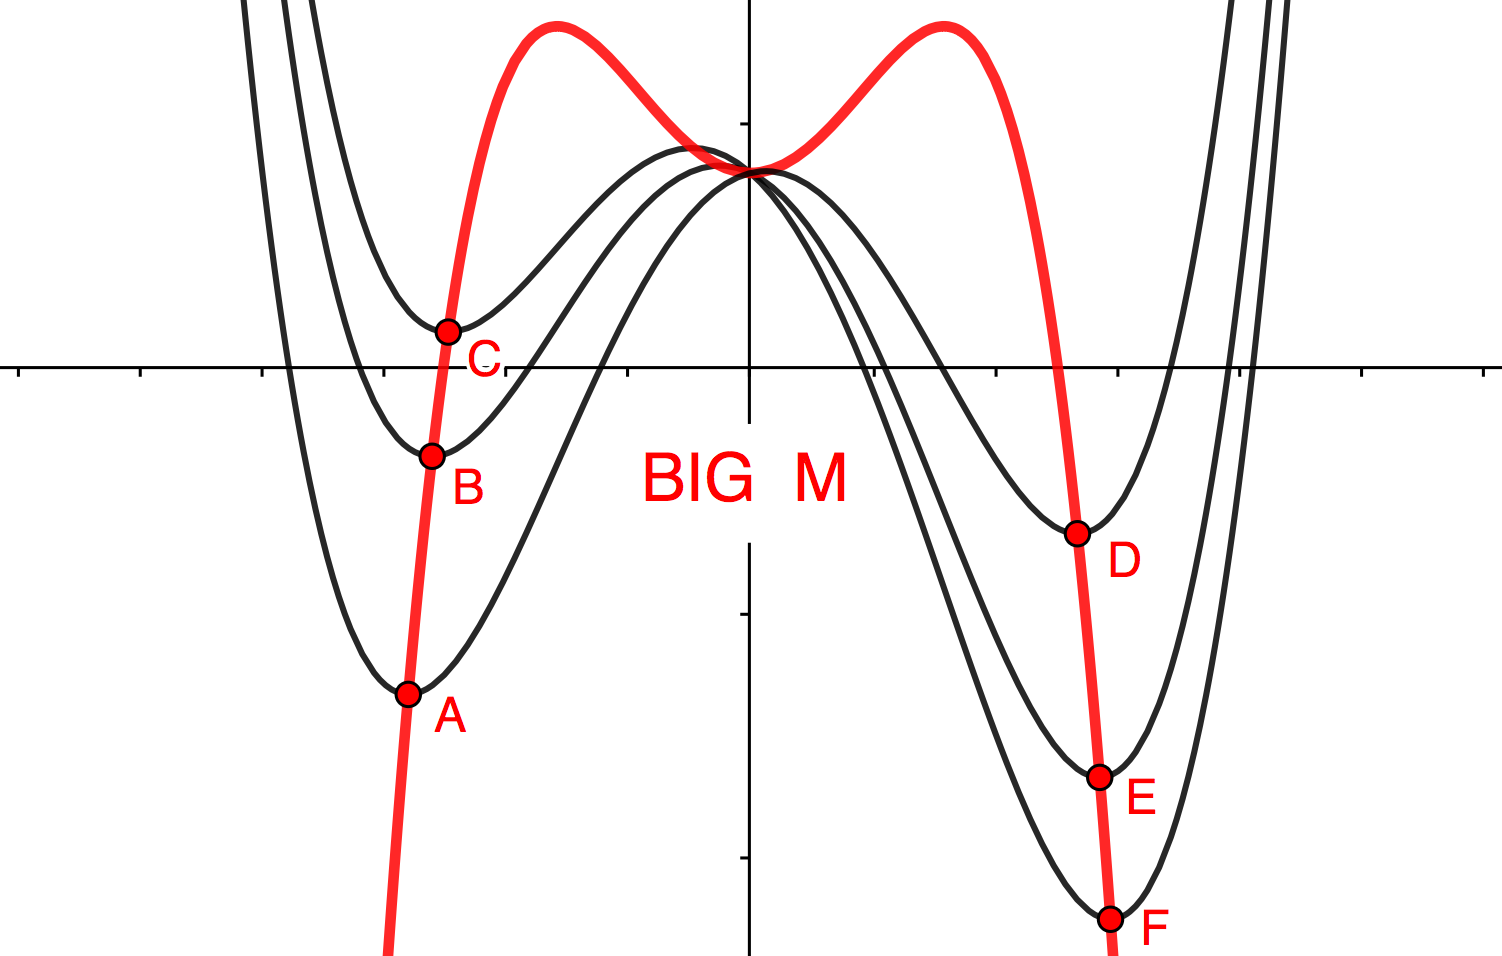 Quartic Polynomials With Specified Turning Points Using BIG M